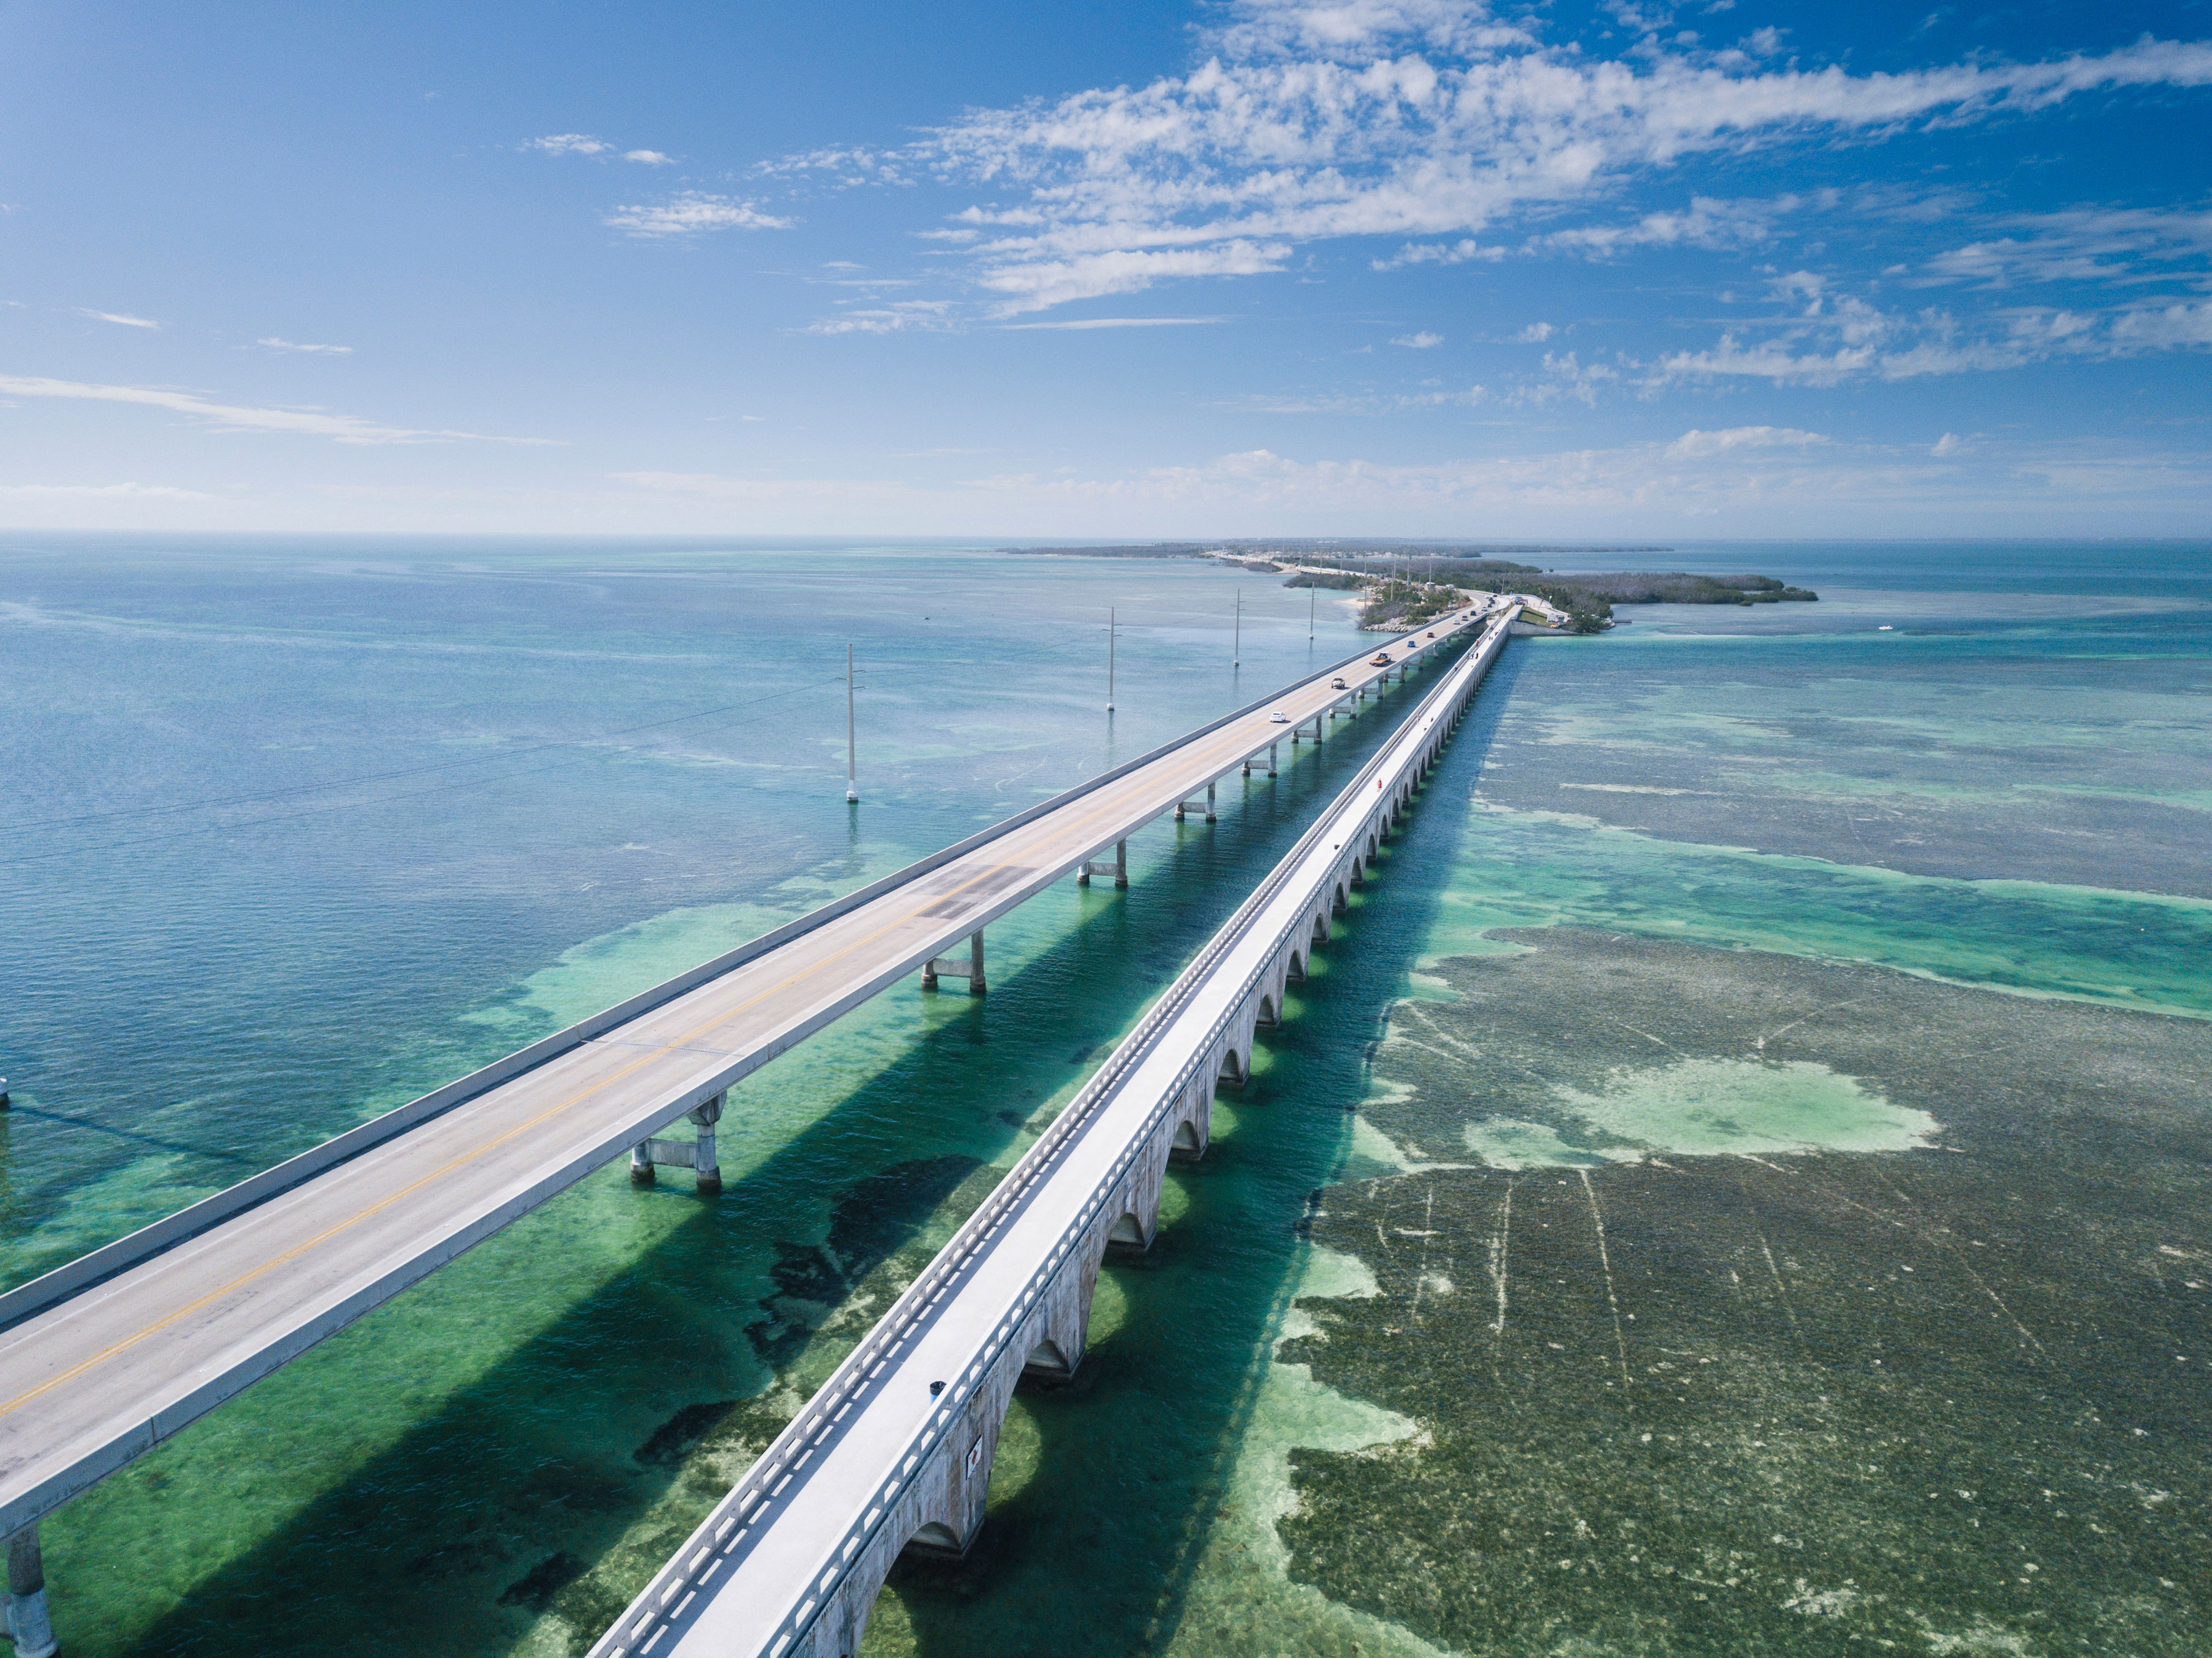 <p>Driving down the Overseas Highway from <a href="https://www.cntraveler.com/destinations/miami?mbid=synd_msn_rss&utm_source=msn&utm_medium=syndication">Miami</a> to <a href="https://www.cntraveler.com/destinations/key-west?mbid=synd_msn_rss&utm_source=msn&utm_medium=syndication">Key West</a> feels like slowly decompressing from the world at large. (The Seven Mile Bridge will make you feel like you’re soaring over the water.) The necklace of islands strung together by this 127.5-mile road vary markedly, moving from the Upper Keys, which seem like shards of the mainland cast off into the ocean, on to the Middle and Lower Keys. The final stop is Key West, a.k.a the Conch Republic. The journey only takes four hours total (though watch for delays, as traffic accidents can block the road and make passing impossible). If you can, earmark a week to meander down and explore hidden corners at your own pace.</p> <p><strong>Where to stop:</strong> Press on through the Upper Keys, which can feel a little gimmicky thanks to an abundance of souvenir shops, and instead linger in the Middle and Lower Keys en route to Key West. Go spearfishing near Marathon with one of the local fishing charters or sunbathe in the wilderness of <a href="https://bahiahondapark.com/">Bahia Honda State Park</a>, one of the prettiest spots in the Keys. Sandy beaches are rare elsewhere on the archipelago, but you’ll find several here. Finally, in Key West, take a refreshing, well-deserved dip at <a href="https://www.floridastateparks.org/parks-and-trails/fort-zachary-taylor-historic-state-park">Fort Zachary State Park.</a> A great plus: there’s music everywhere– so as long as you're strolling, you’ll get your groove on.</p> <p><strong>Where to eat:</strong> You’re going to want to try Key Lime Pie in its spiritual home—debates rage as to the best, but we’d start with a slice at <a href="https://blueheavenkw.com/">Blue Heaven</a>, an al fresco restaurant with a yard full of roosters—but don’t miss the chance to detour for a pizza and a pint at the <a href="https://nonamepub.com/">No Name Pub</a>. Located on a hard-to-find island where Cuban patriots staged rehearsals for the Bay of Pigs invasion, the pub’s interior is covered with currency stapled to almost every surface. Ask to borrow the staple gun if you want to add to your own.</p> <p><strong>Where to stay:</strong> Key West is surprisingly large, and much of the <a href="https://www.cntraveler.com/gallery/best-hotels-in-key-west?mbid=synd_msn_rss&utm_source=msn&utm_medium=syndication">accommodations</a> are clustered around the eastern edges—avoid this at all costs, as it’s a long hike from the main drag on Duval. Instead, splurge for one of the 19th-century cottages at <a href="https://www.kimptonkeywest.com/key-west-hotels/winslows-bungalows/">Winslow’s Bungalows</a> downtown, or at <a href="https://www.cntraveler.com/hotels/the-perry-hotel-key-west?mbid=synd_msn_rss&utm_source=msn&utm_medium=syndication">The Perry Hotel</a> for a more chic and spacious vibe. If preferred, there are some great <a href="https://www.cntraveler.com/gallery/best-key-west-airbnbs-and-vacation-rentals?mbid=synd_msn_rss&utm_source=msn&utm_medium=syndication">Airbnb recommendations</a> available to book as well.</p><p>Sign up to receive the latest news, expert tips, and inspiration on all things travel</p><a href="https://www.cntraveler.com/newsletter/the-daily?sourceCode=msnsend">Inspire Me</a>